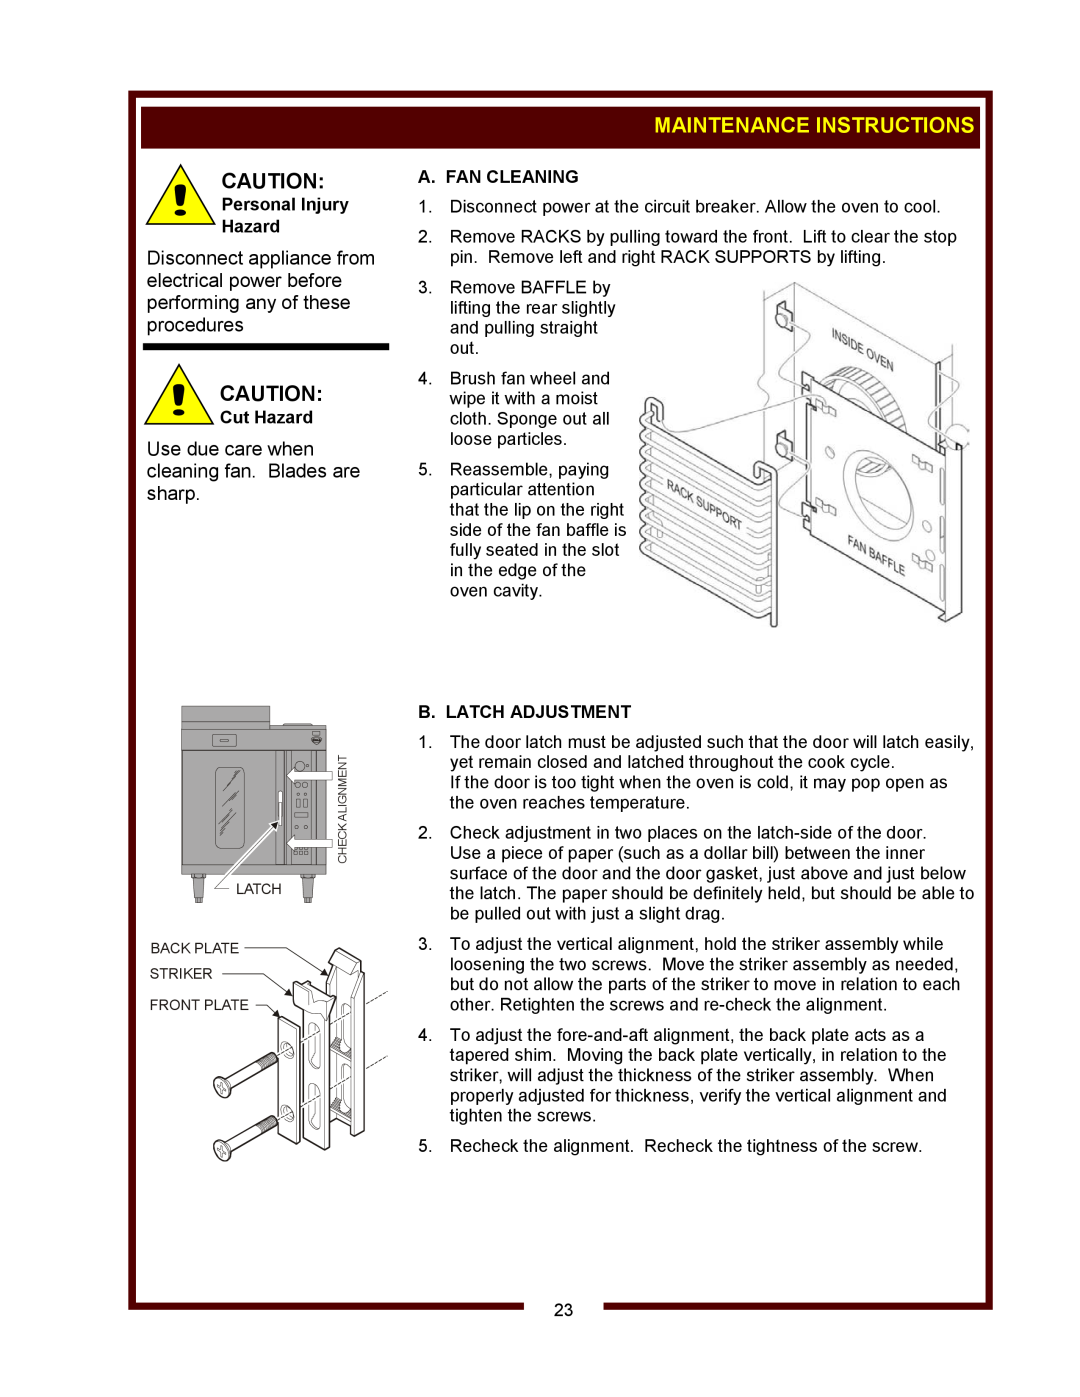 Bloomfield WVOC-2HFG Maintenance Instructions, Use due care when cleaning fan. Blades are sharp, Personal Injury Hazard 